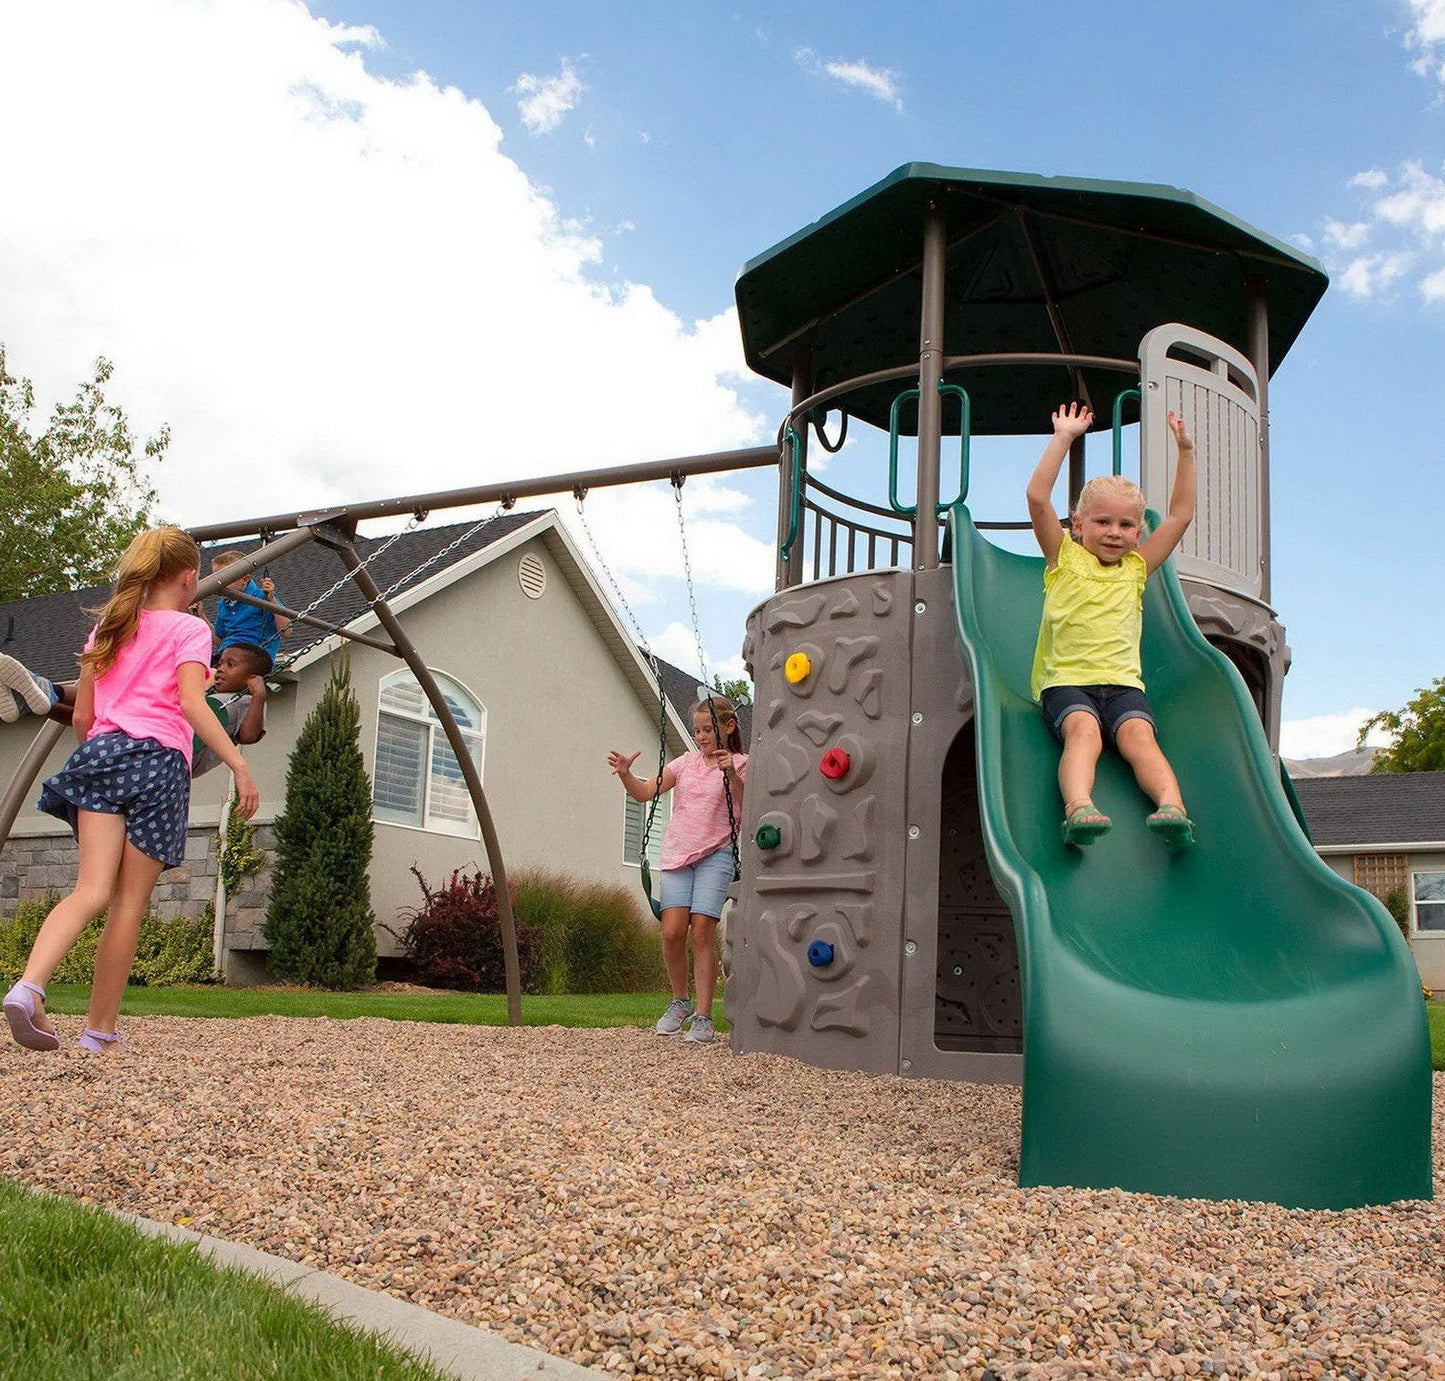 Huge Outdoor Playground Swing Set Climbing Tower Clubhouse Playset Swing Slide